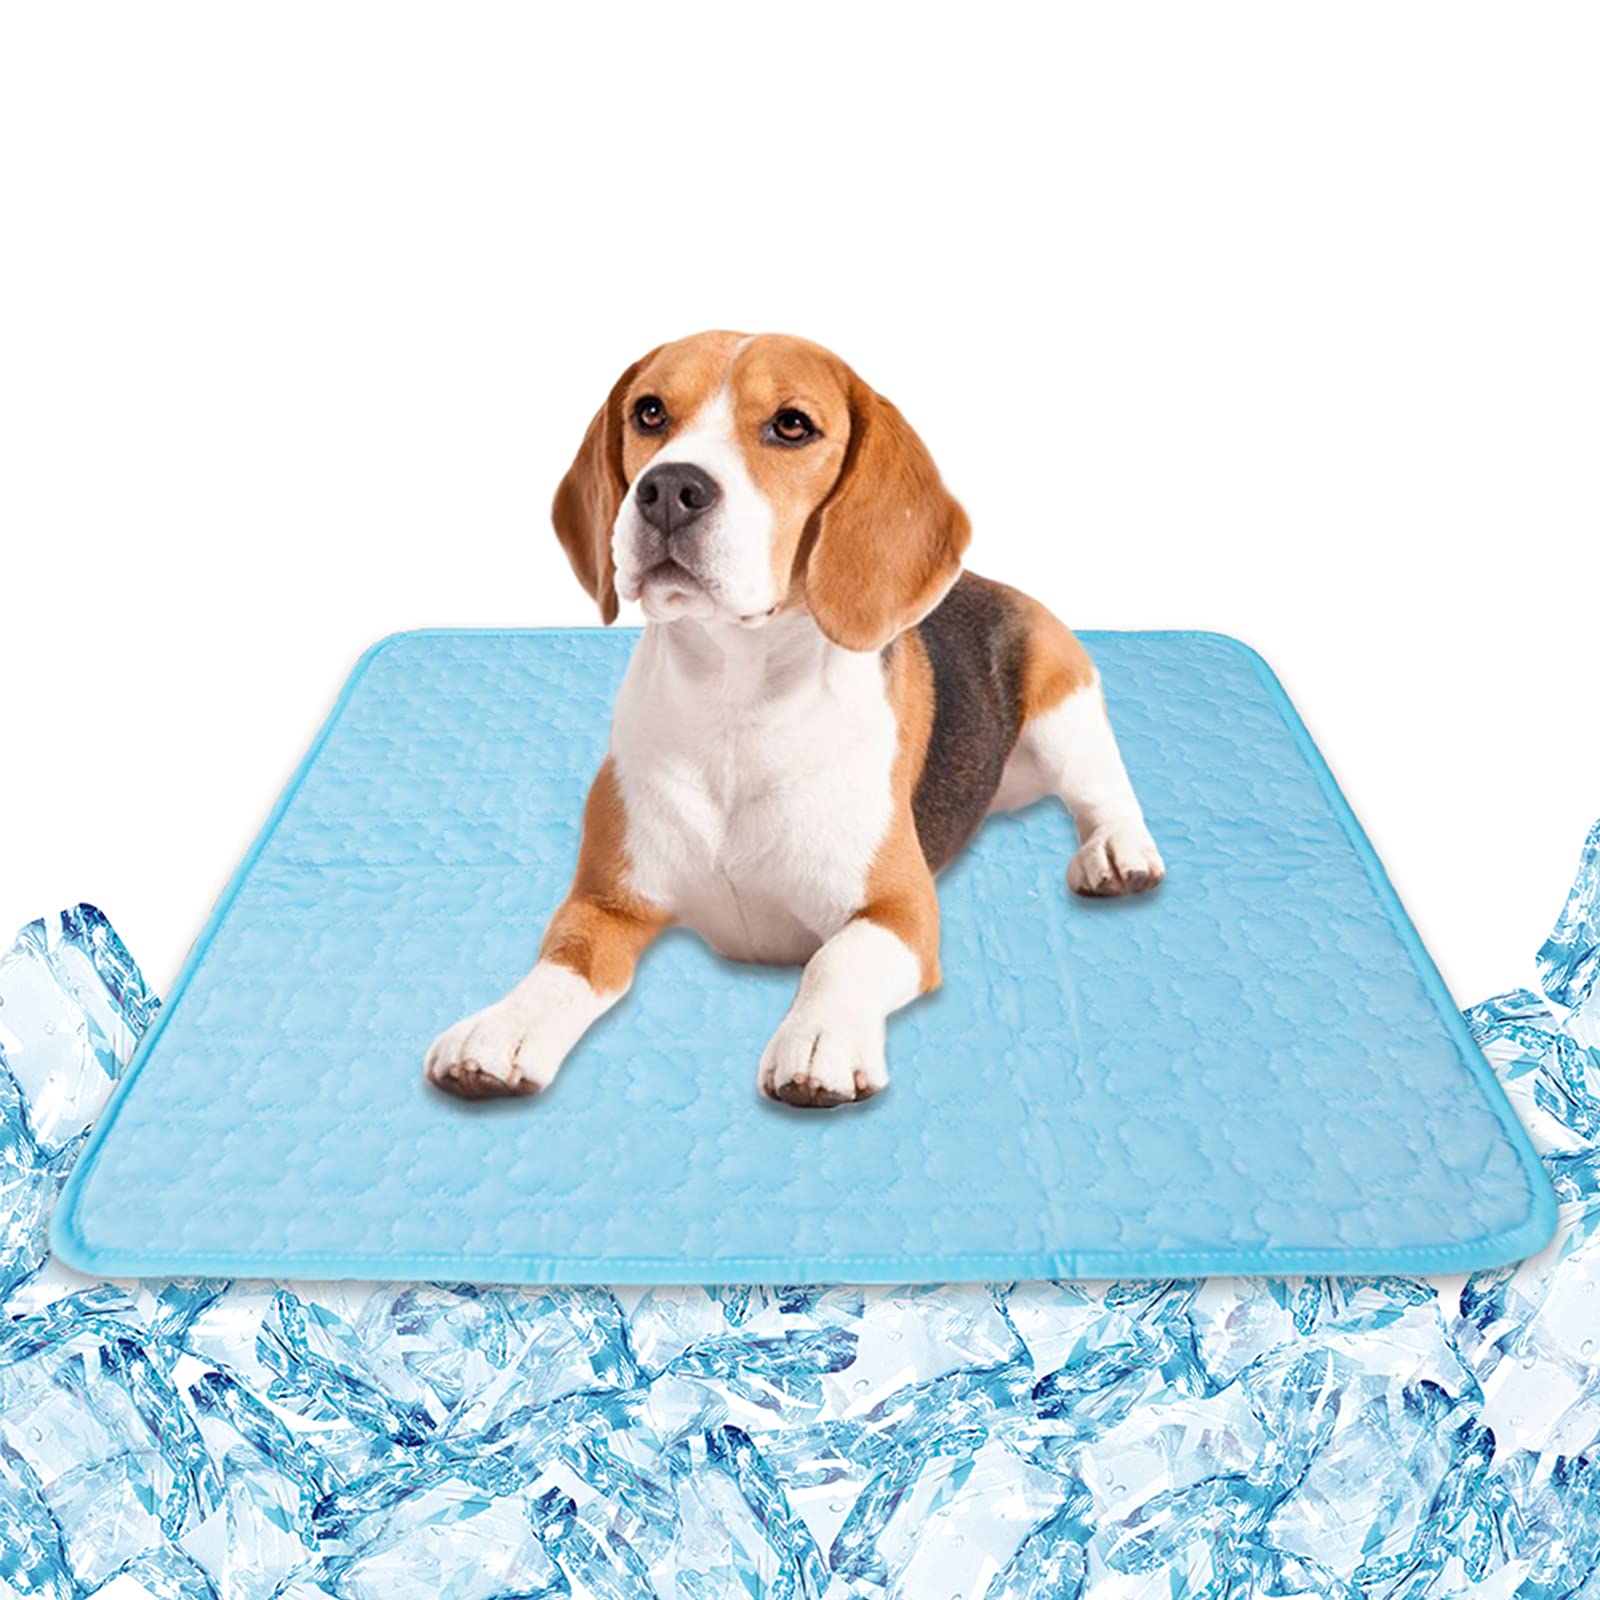 KALINcO Dog cooling Mat Washable Pet Self cooling Pad Blanket Summer cooling Pads for Dogs cats (40*28 inch Blue)